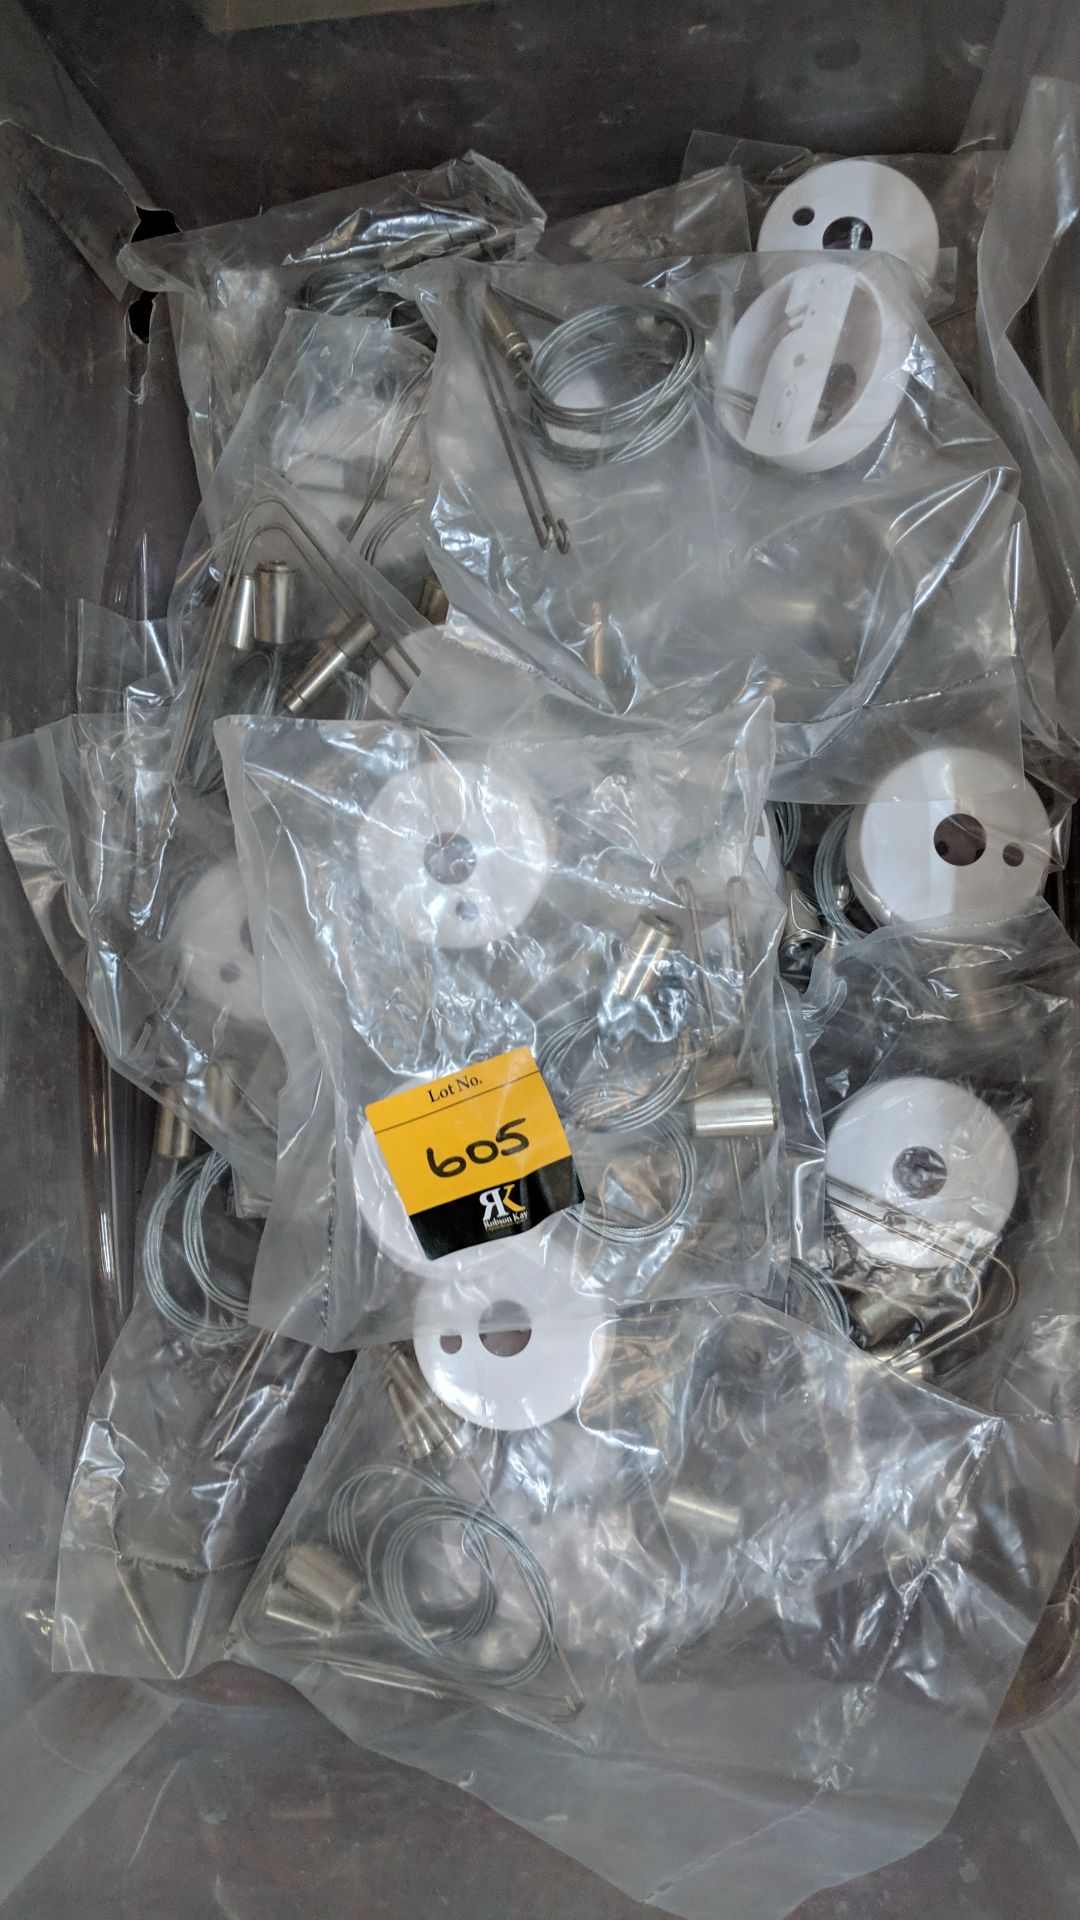 14 off wire lighting kits This lot is one of a number of lots in this sale being sold on behalf of a - Image 2 of 2